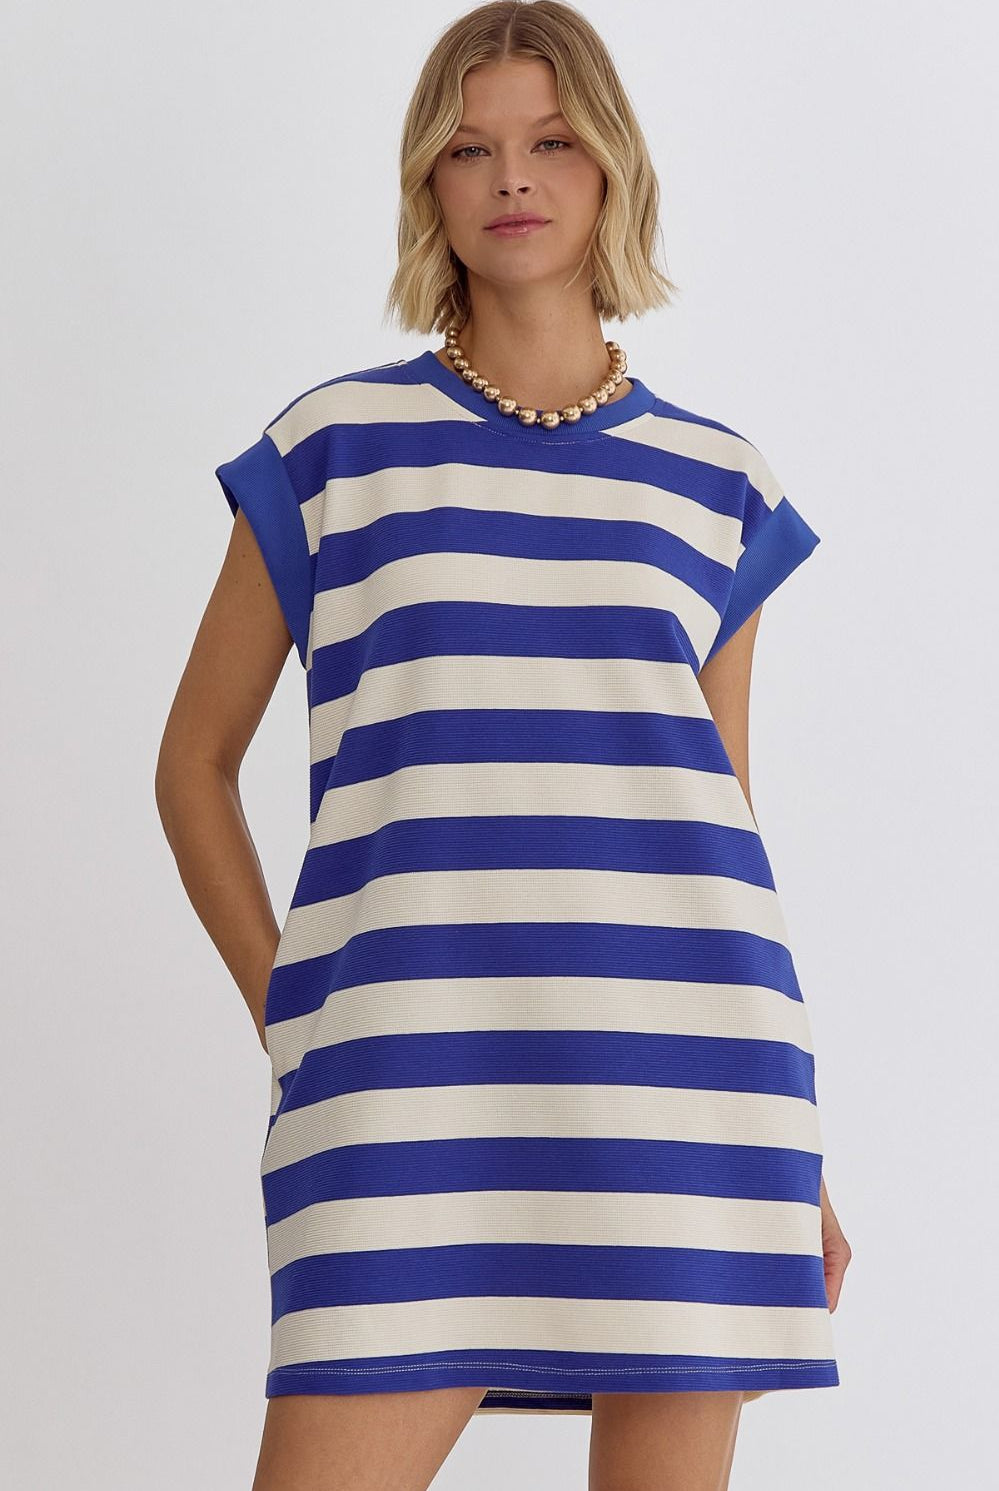 Florence Stripe Sleeveless Dress With Pockets - Be You Boutique